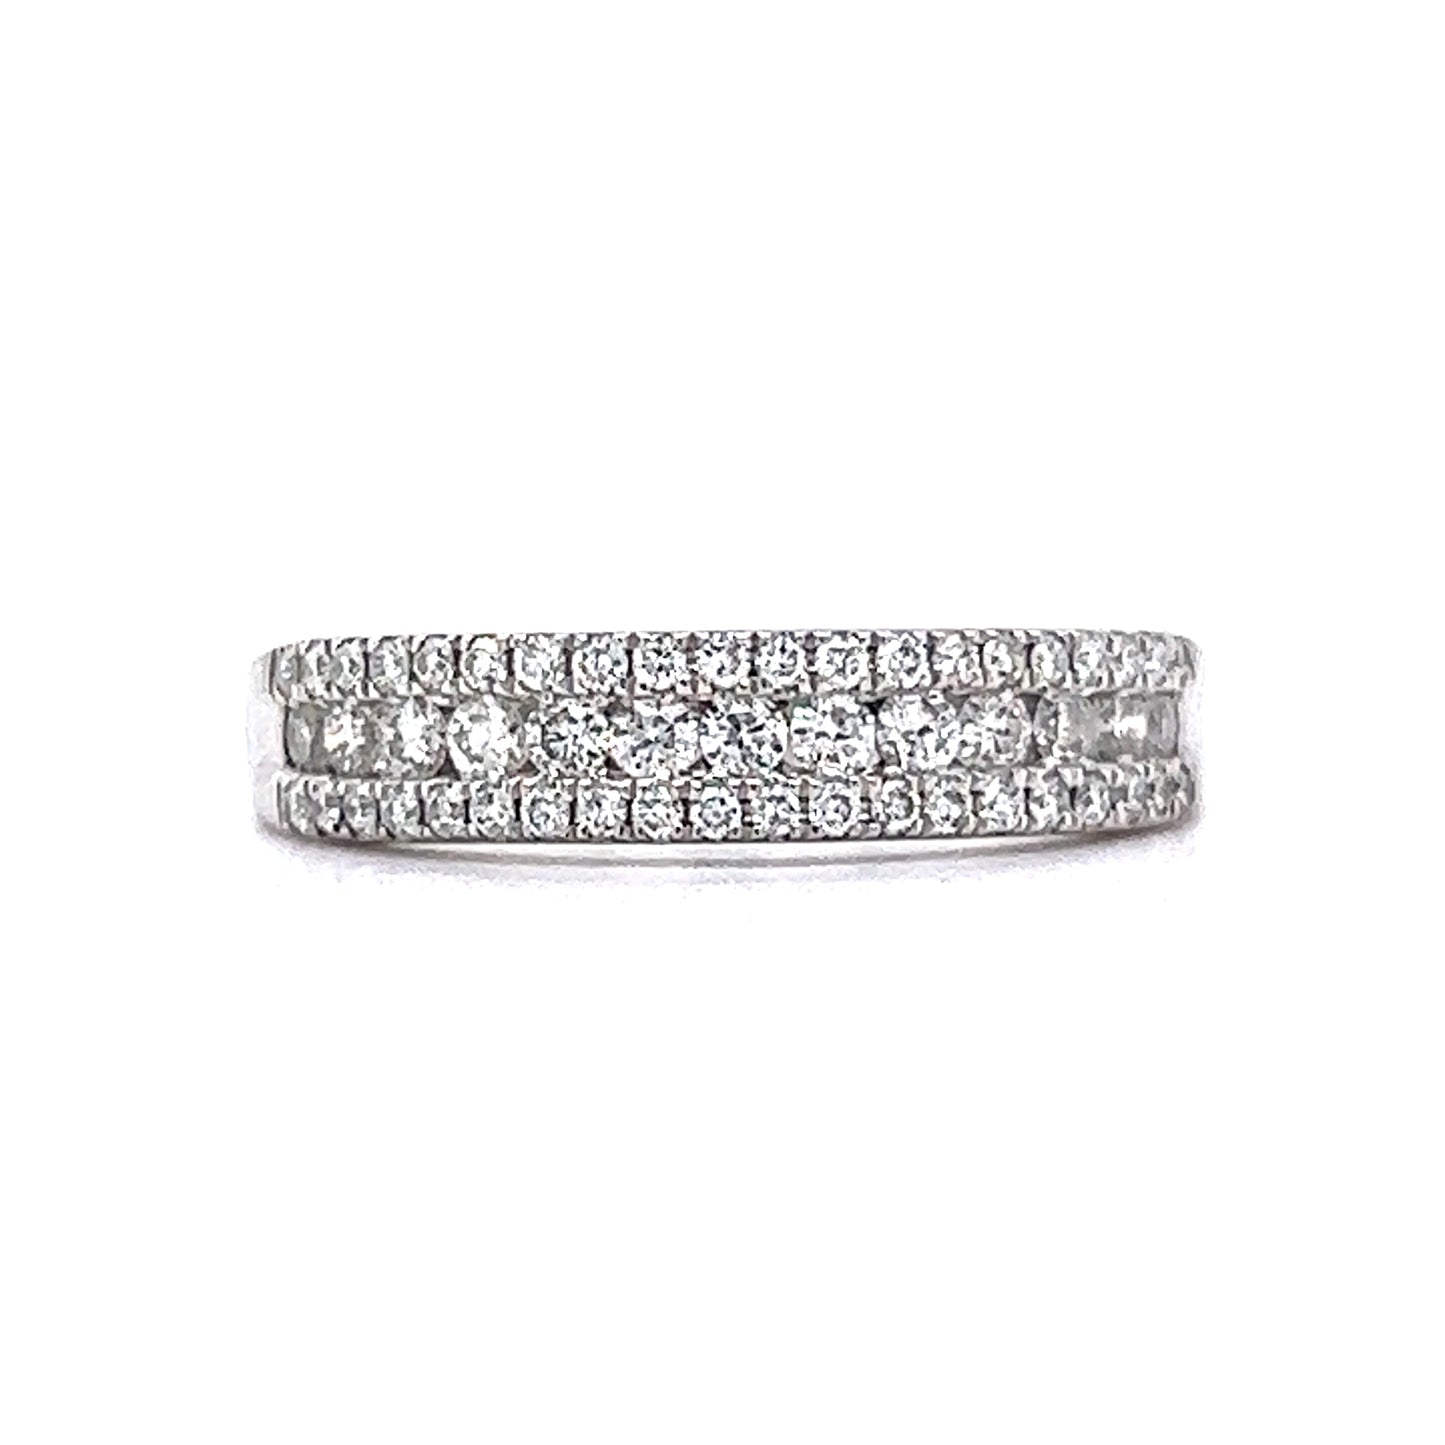 Three Row Pave Diamond Stacking Ring in 14k White Gold